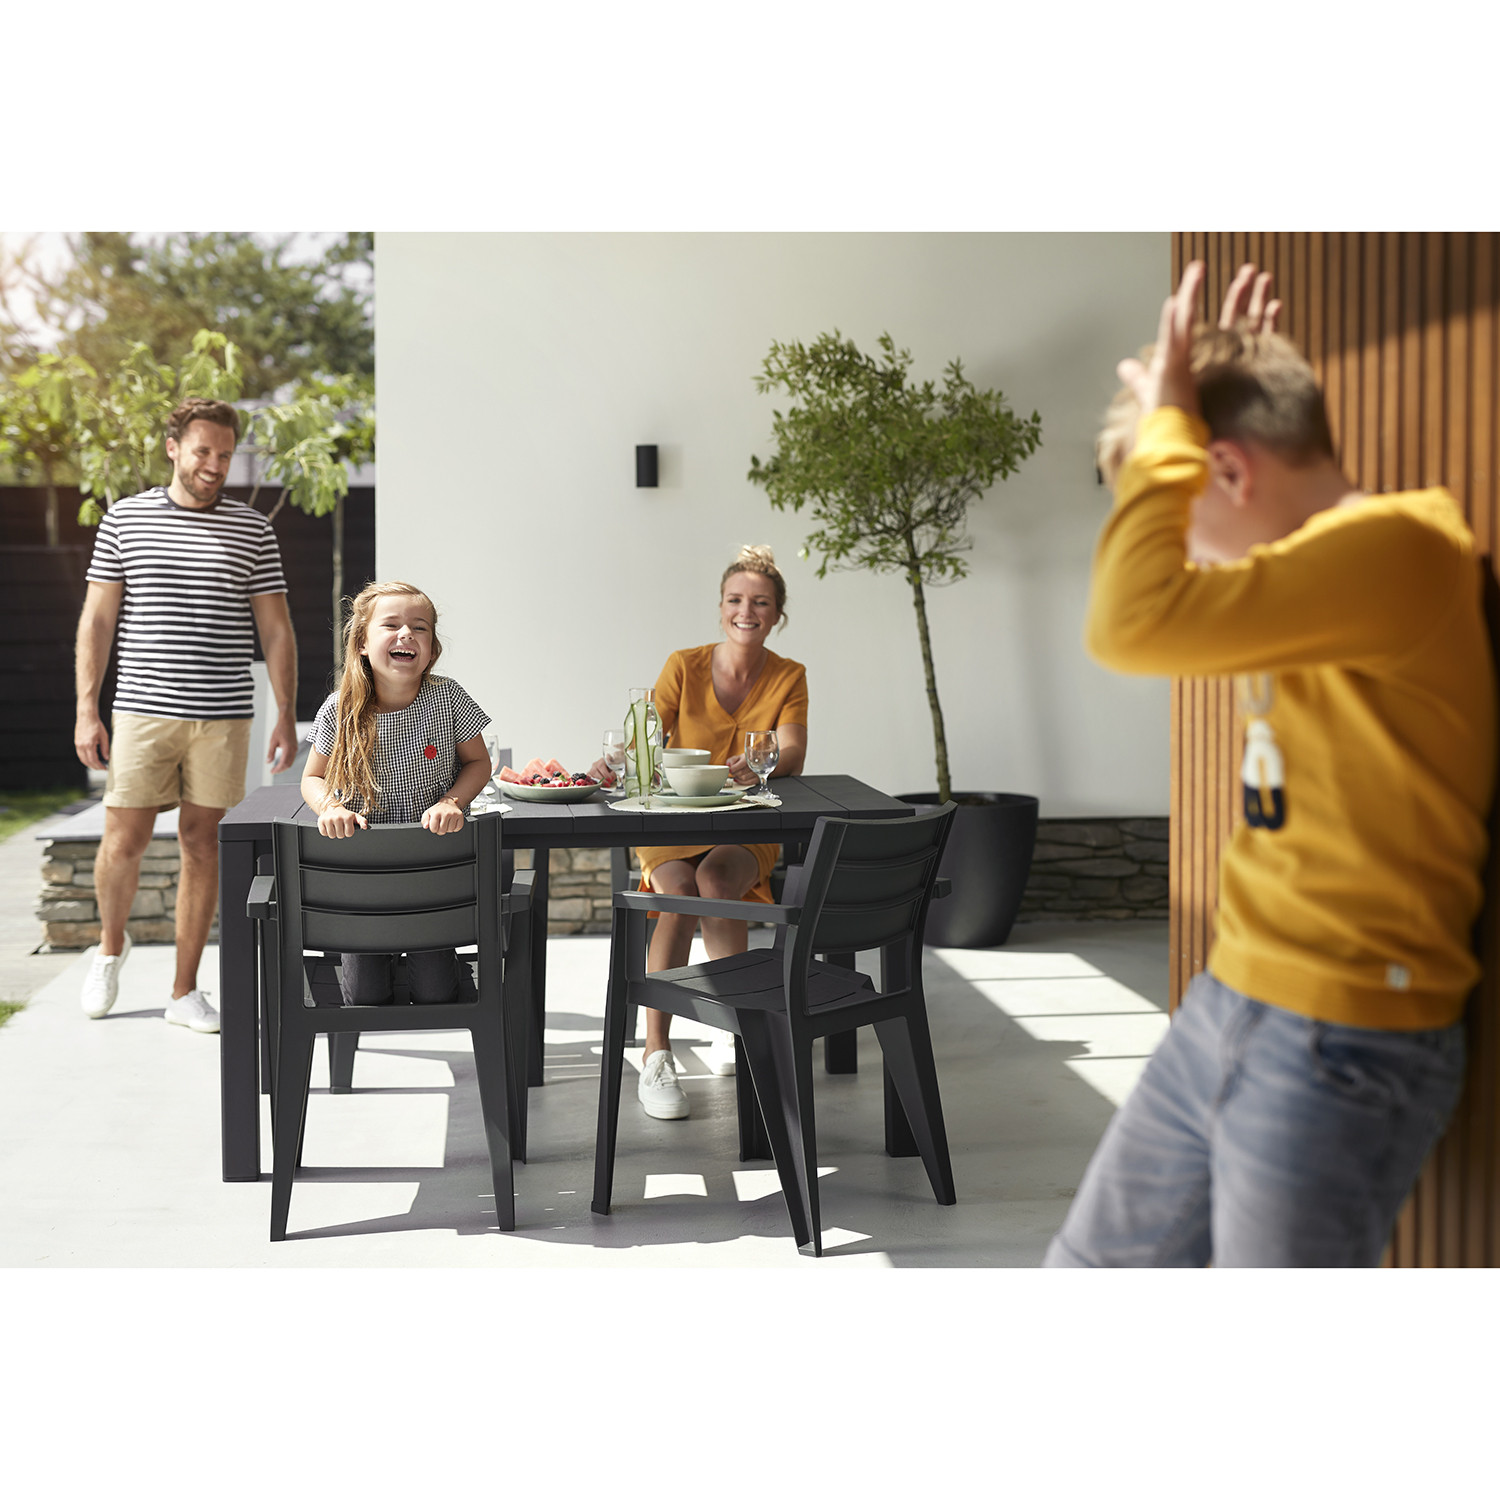 Keter Julie 6 Seater Patio Table Graphite Image 5